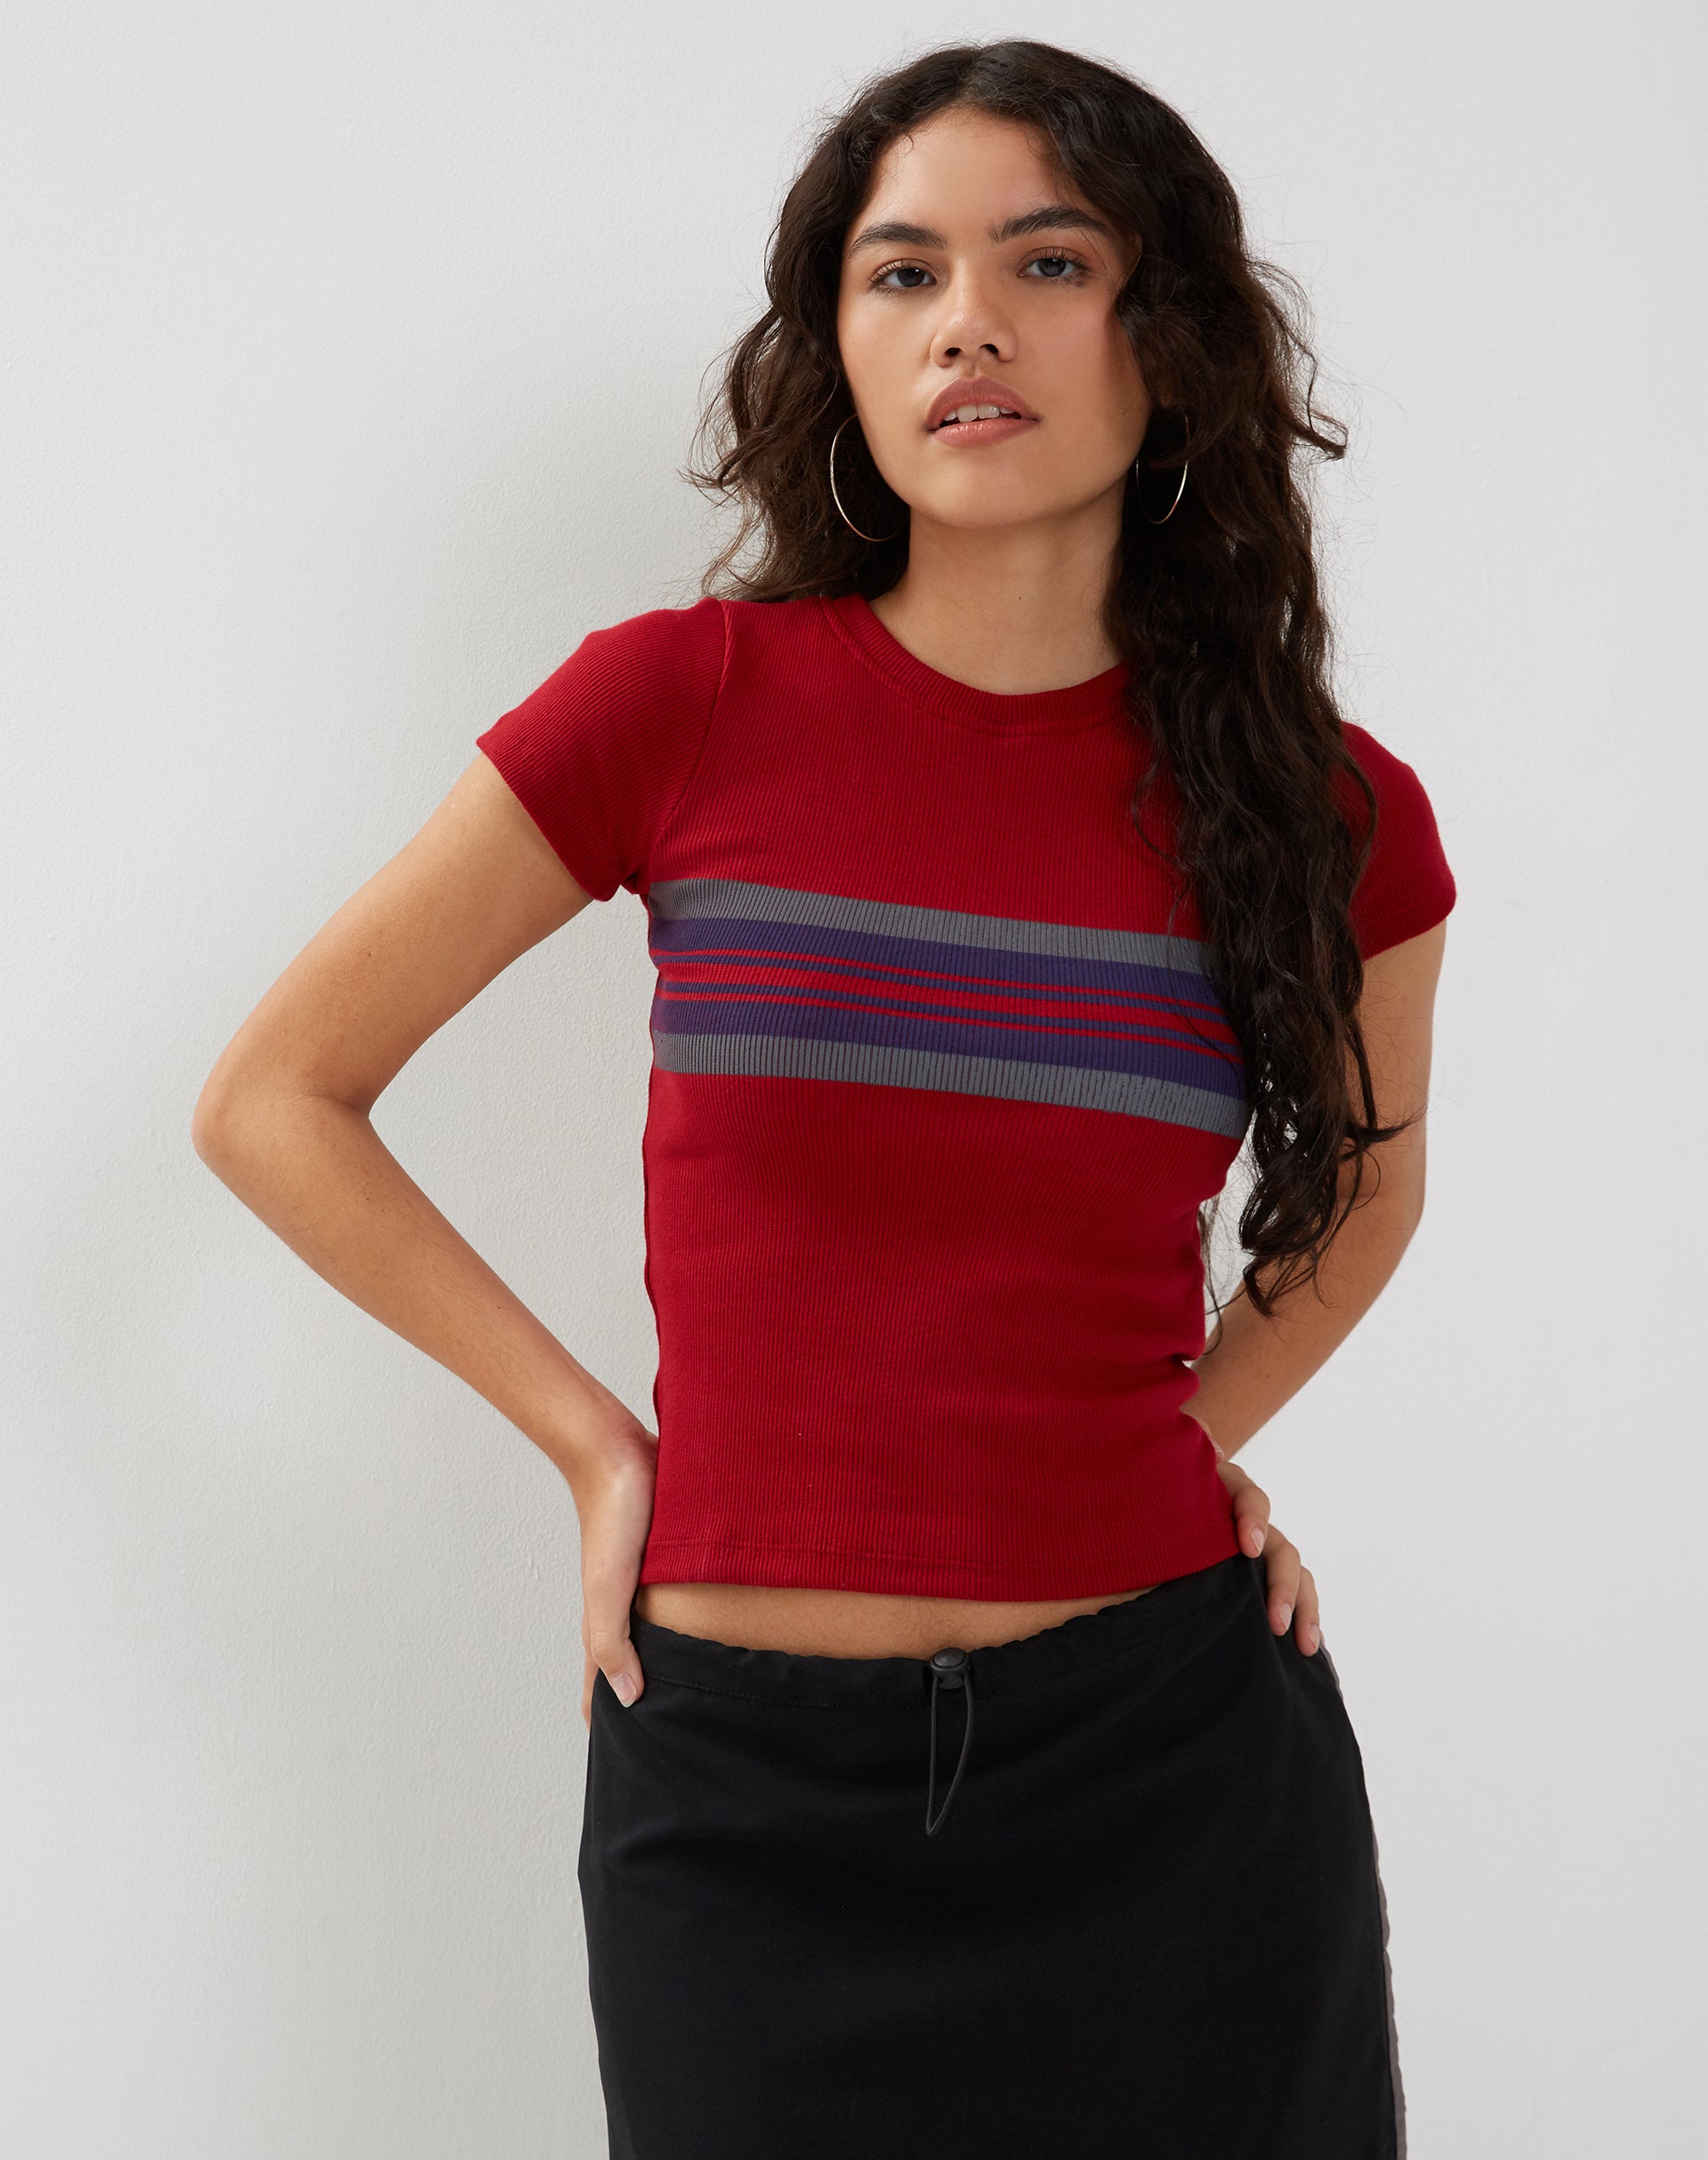 Image of Tiona Top in Adrenalin Red Stripe